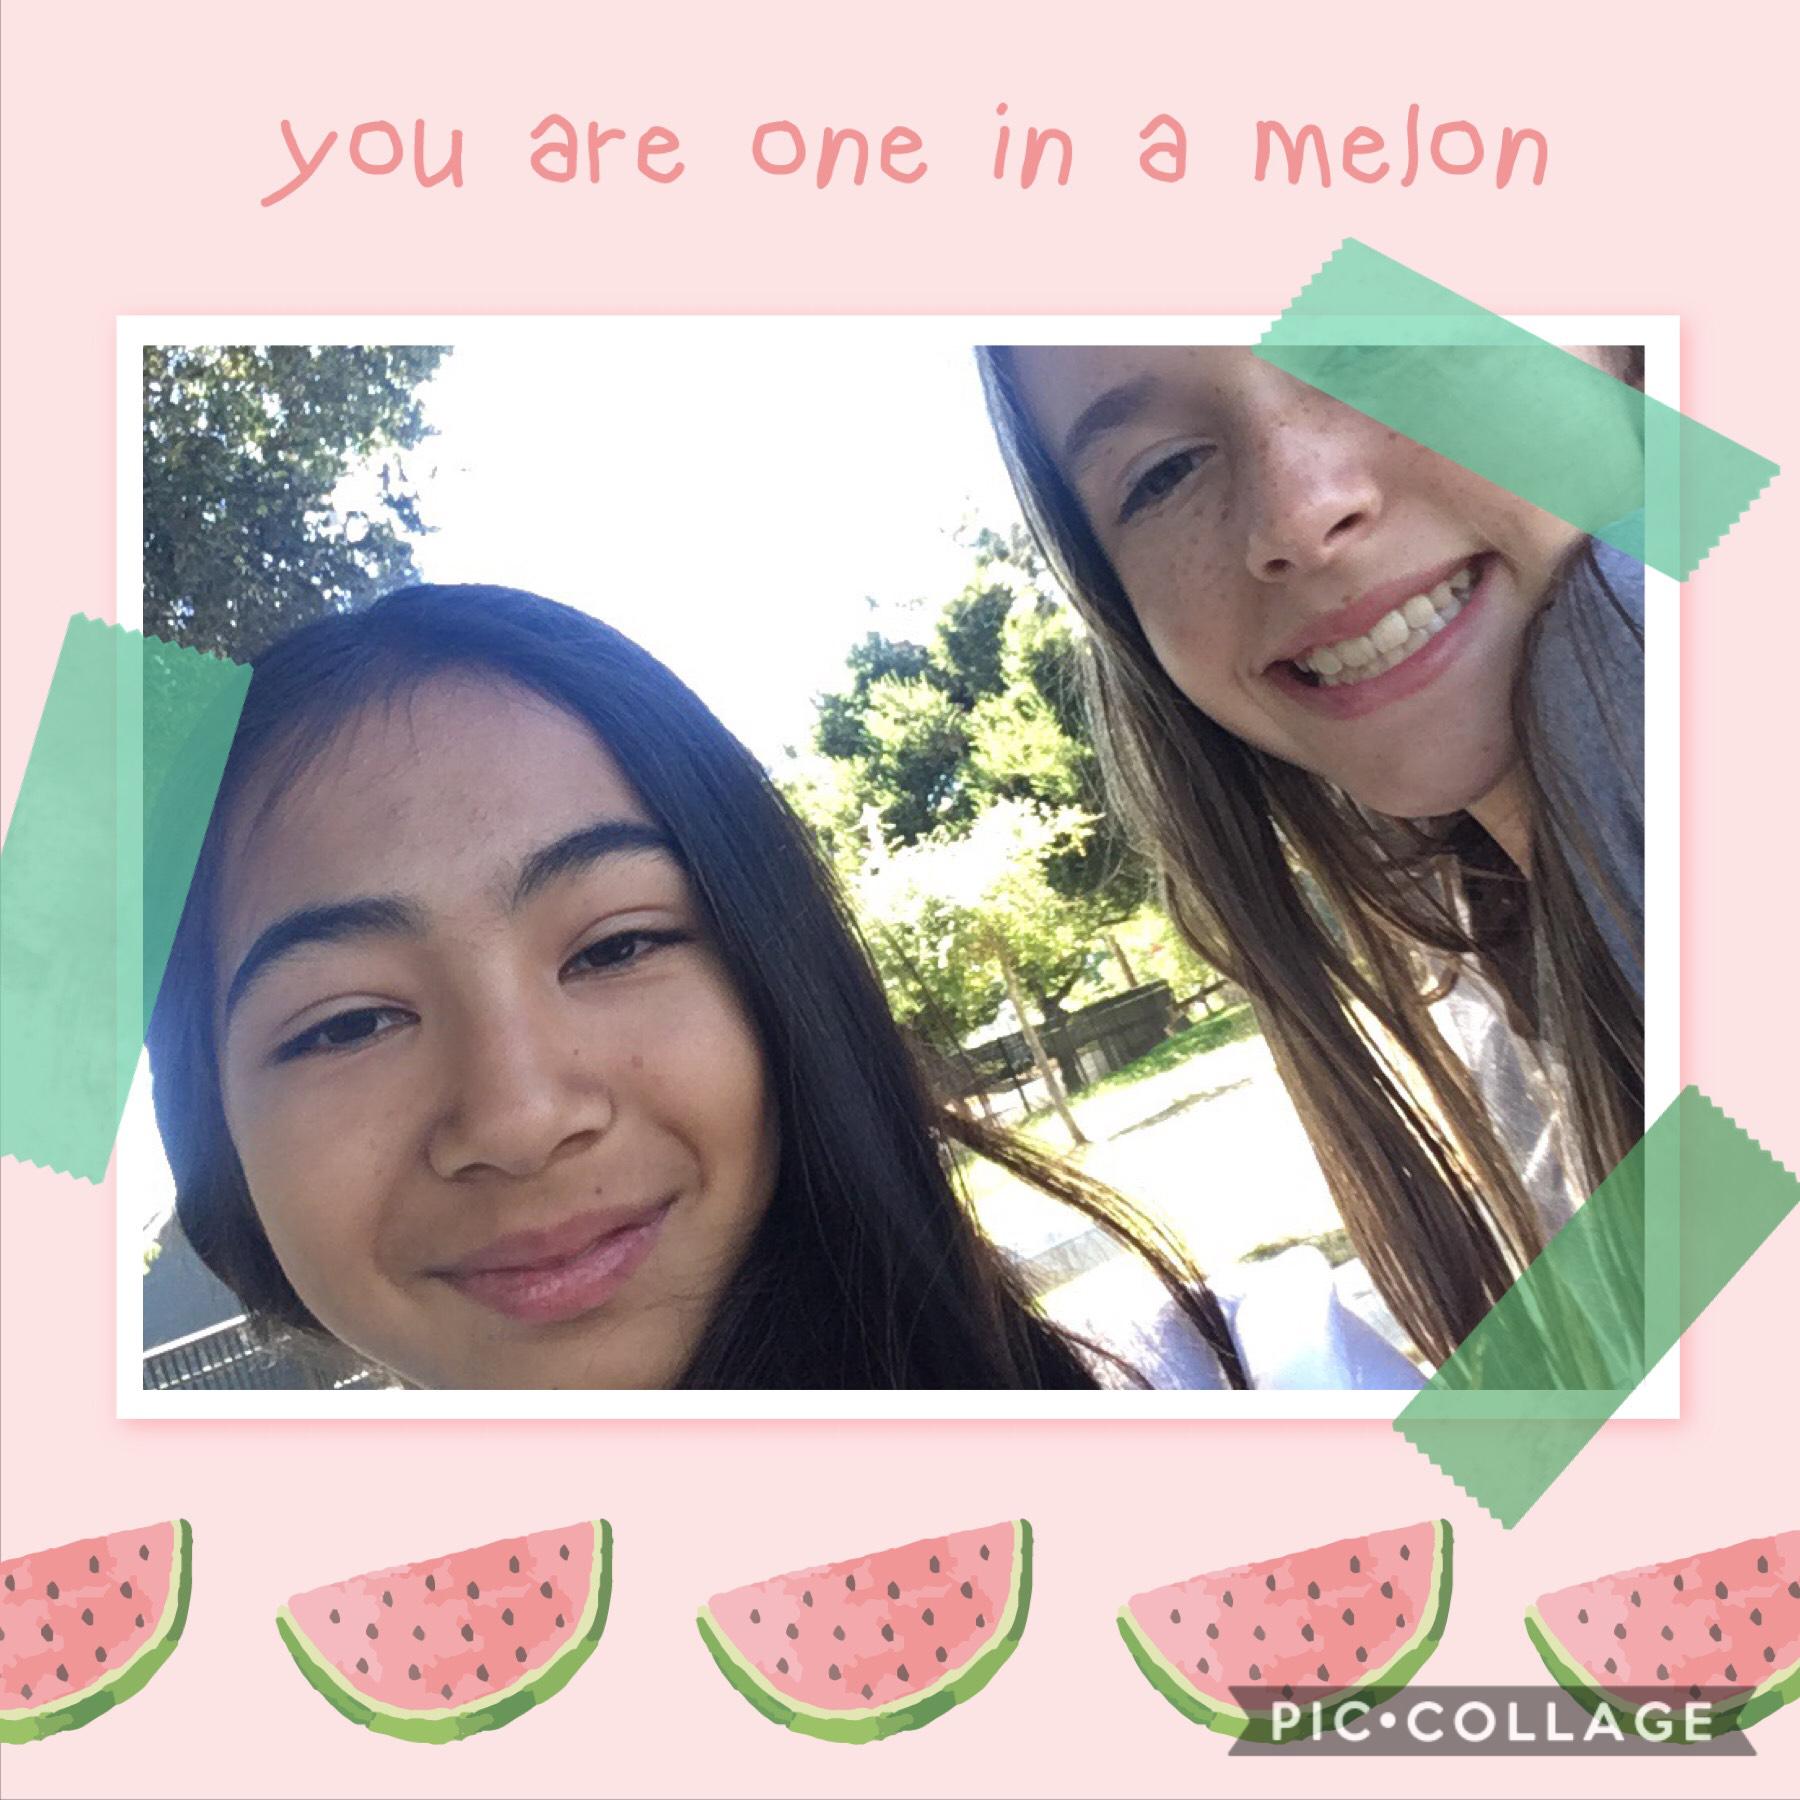 I love my BFF love you Abby your the funniest and kindest most warm hearted person out there oh and your one in a mellon 😜 same with the rest of you guys !!!!! 